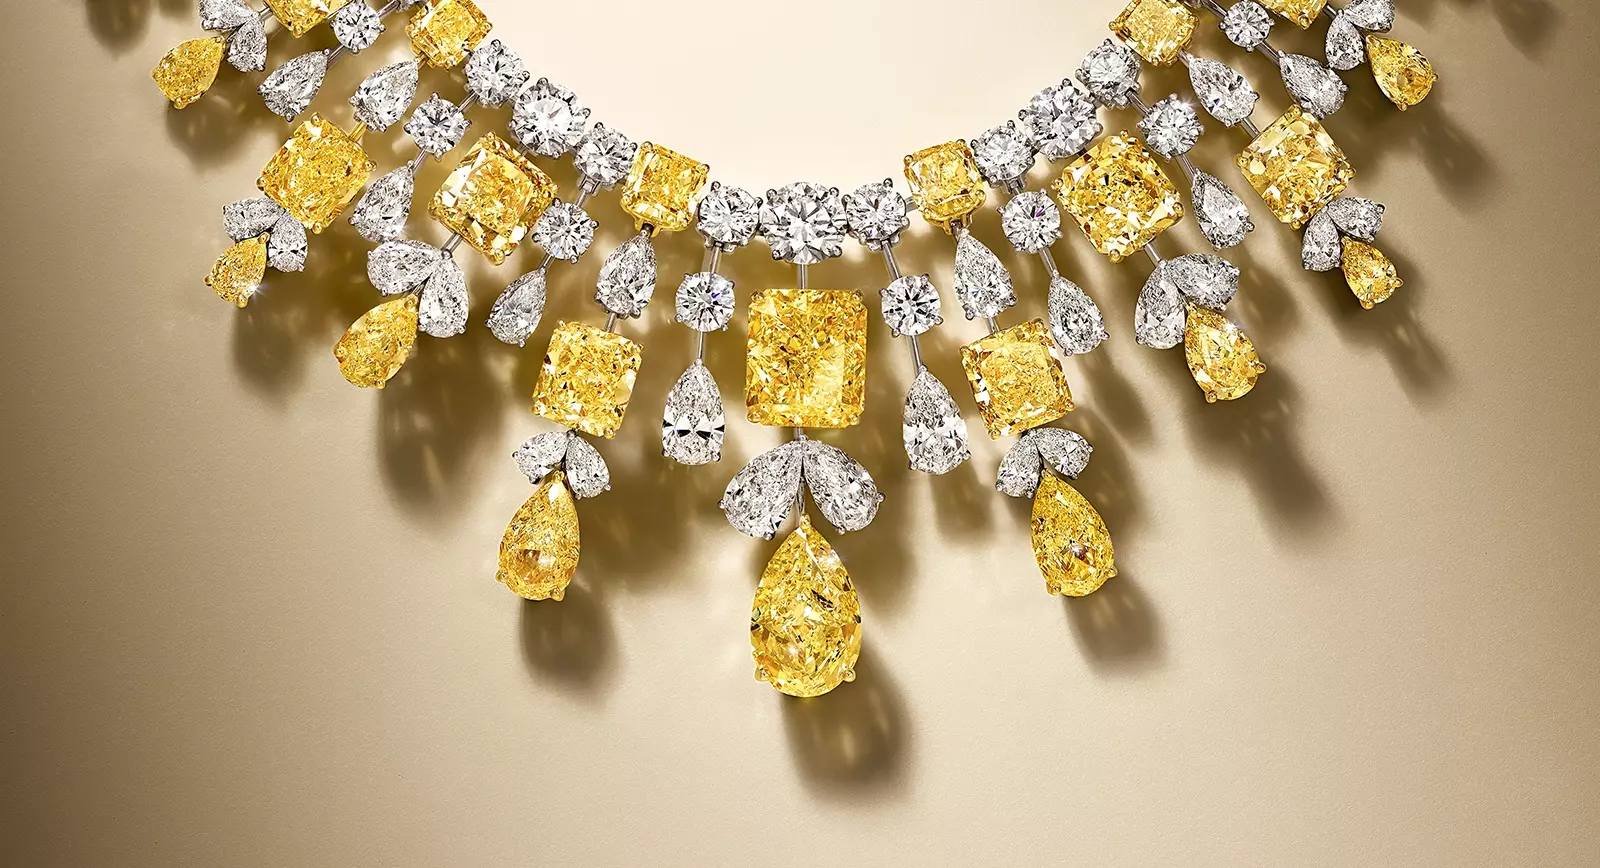 Top 10: The Best Yellow Diamond High Jewels of 2023 - Graff Sunrise High Jewellery collection necklace 